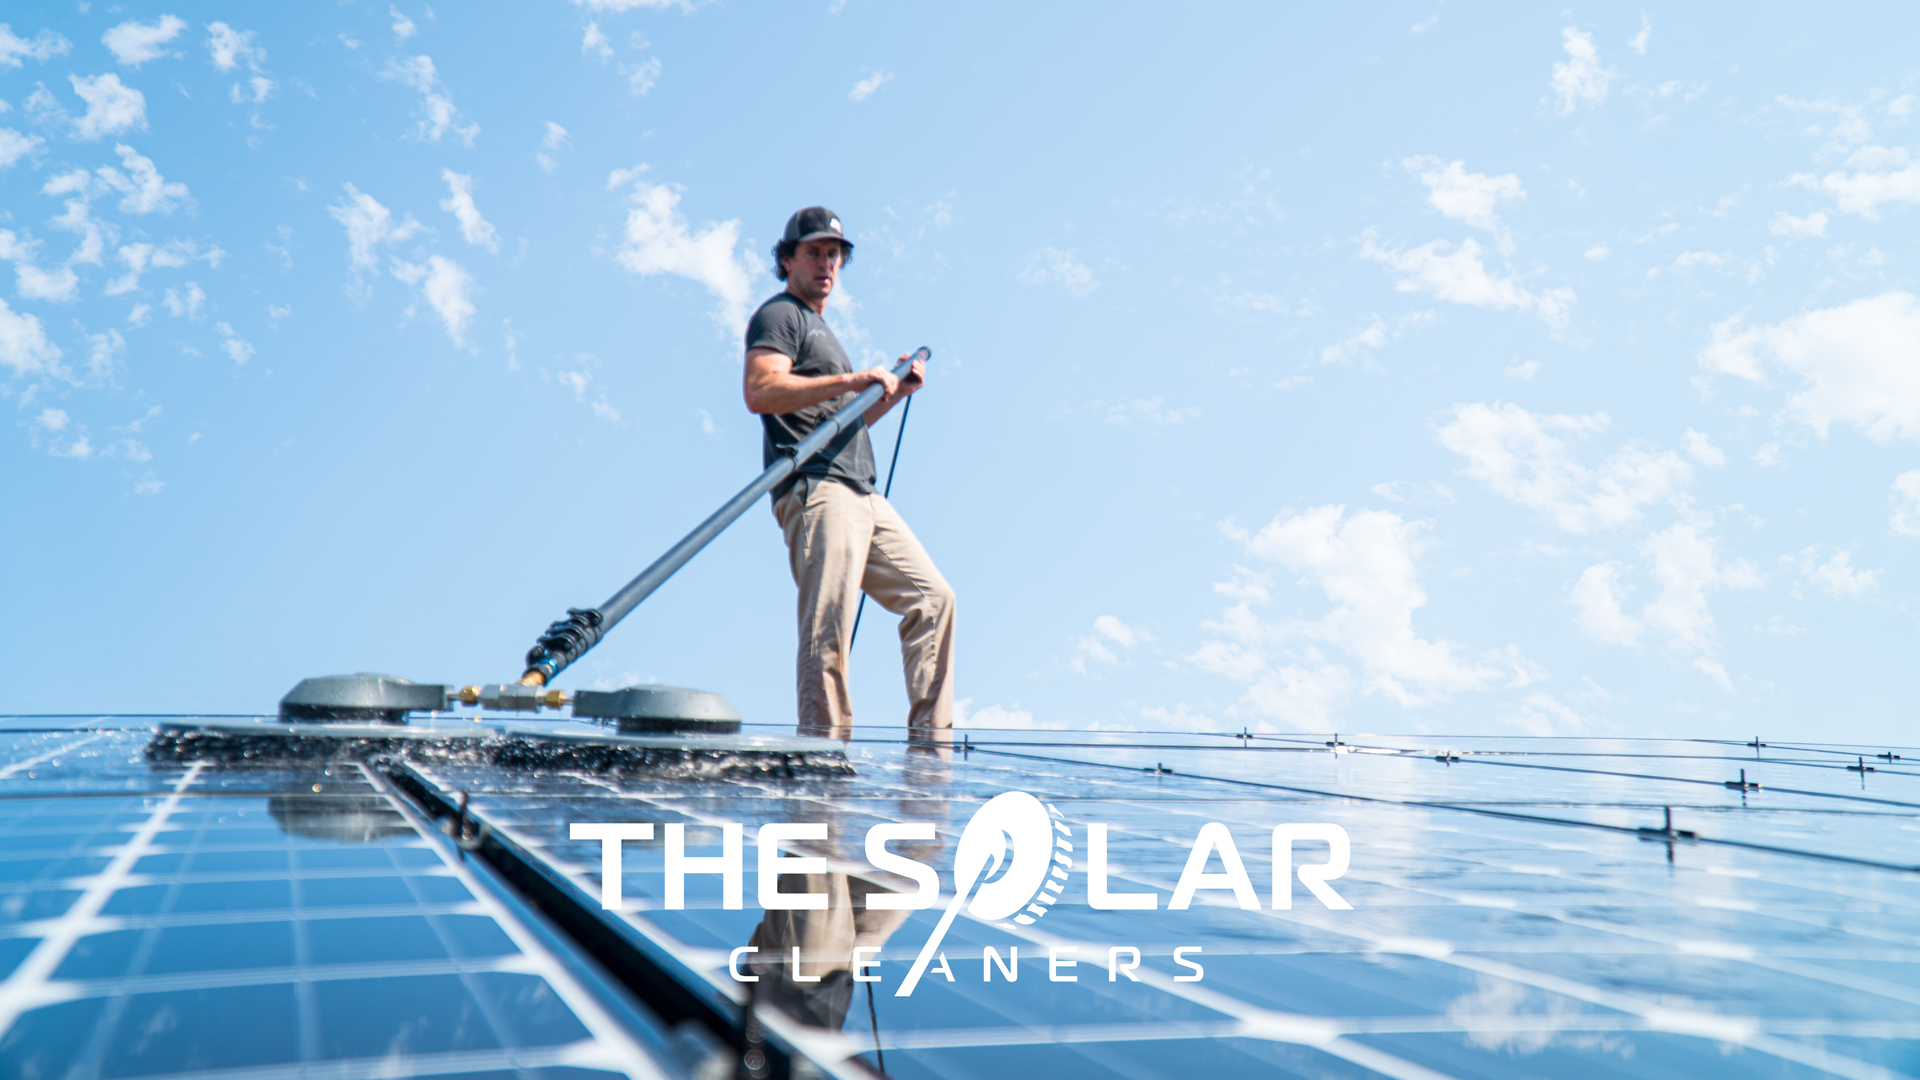 Solar cleaning services